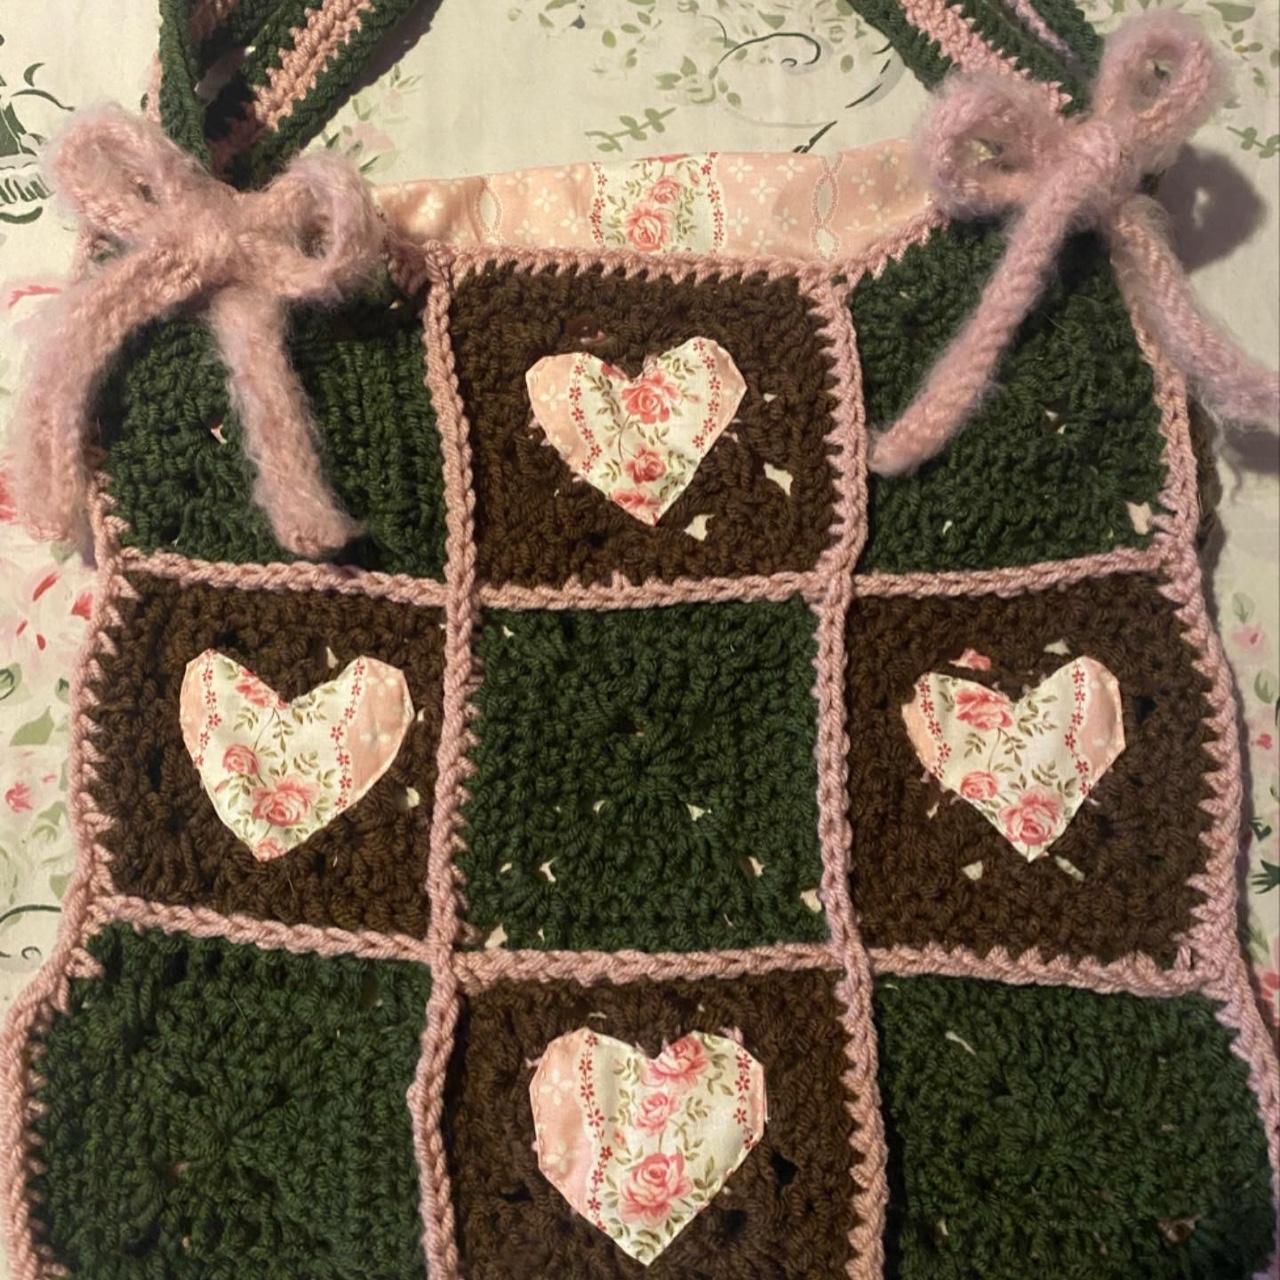 Coquette Embroidered Heart Bag